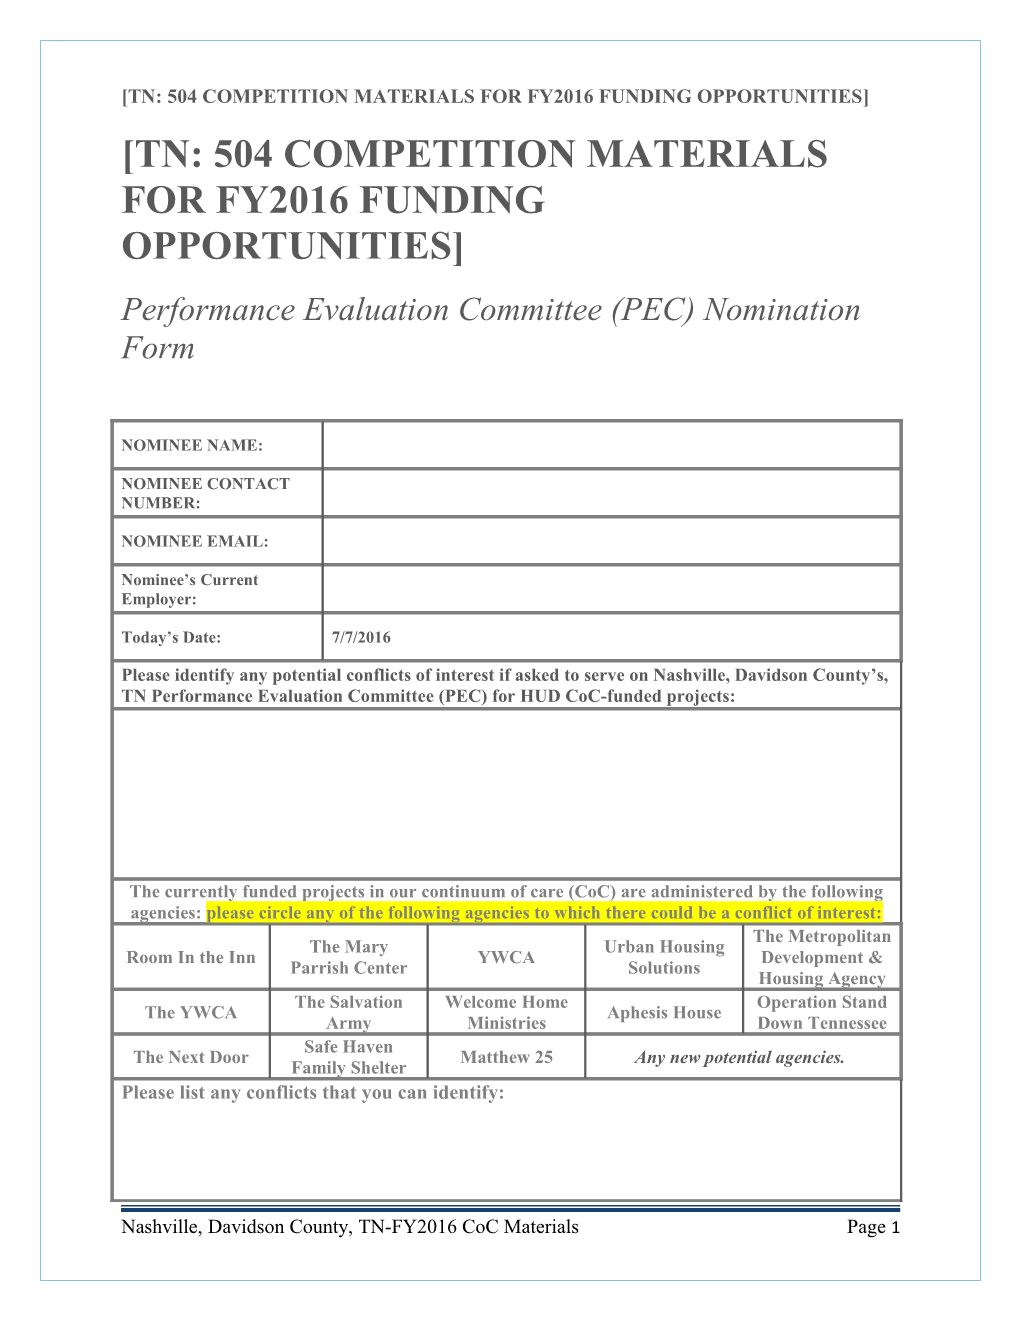 TN: 504 Competition Materials for FY2016 Funding Opportunities